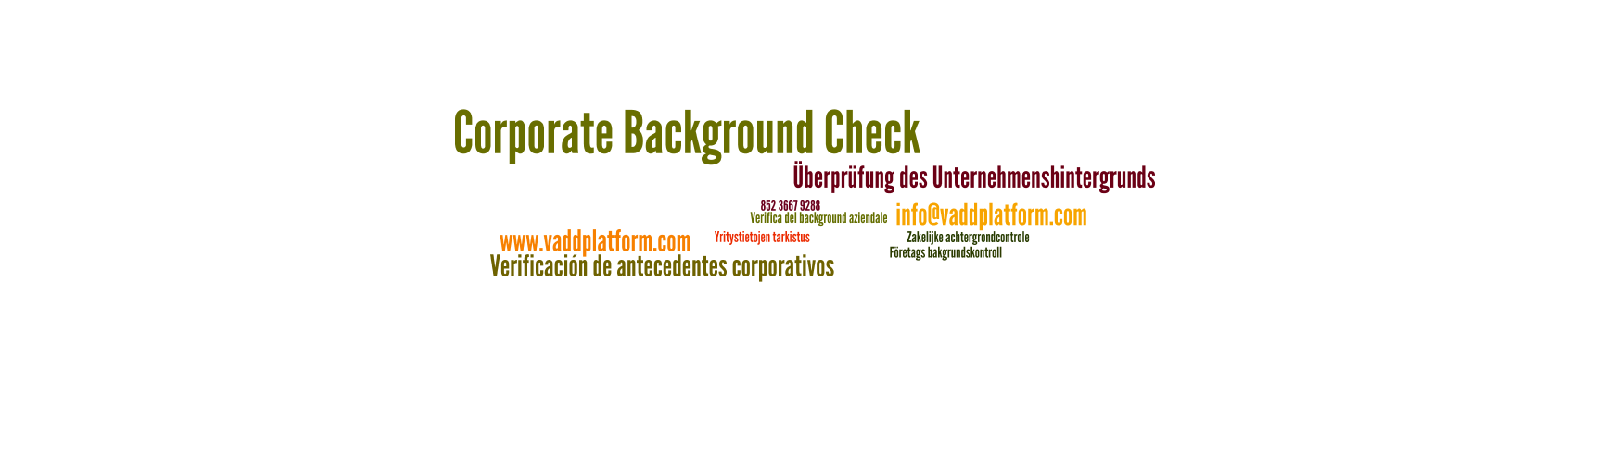 Corporate Background search-200207173609